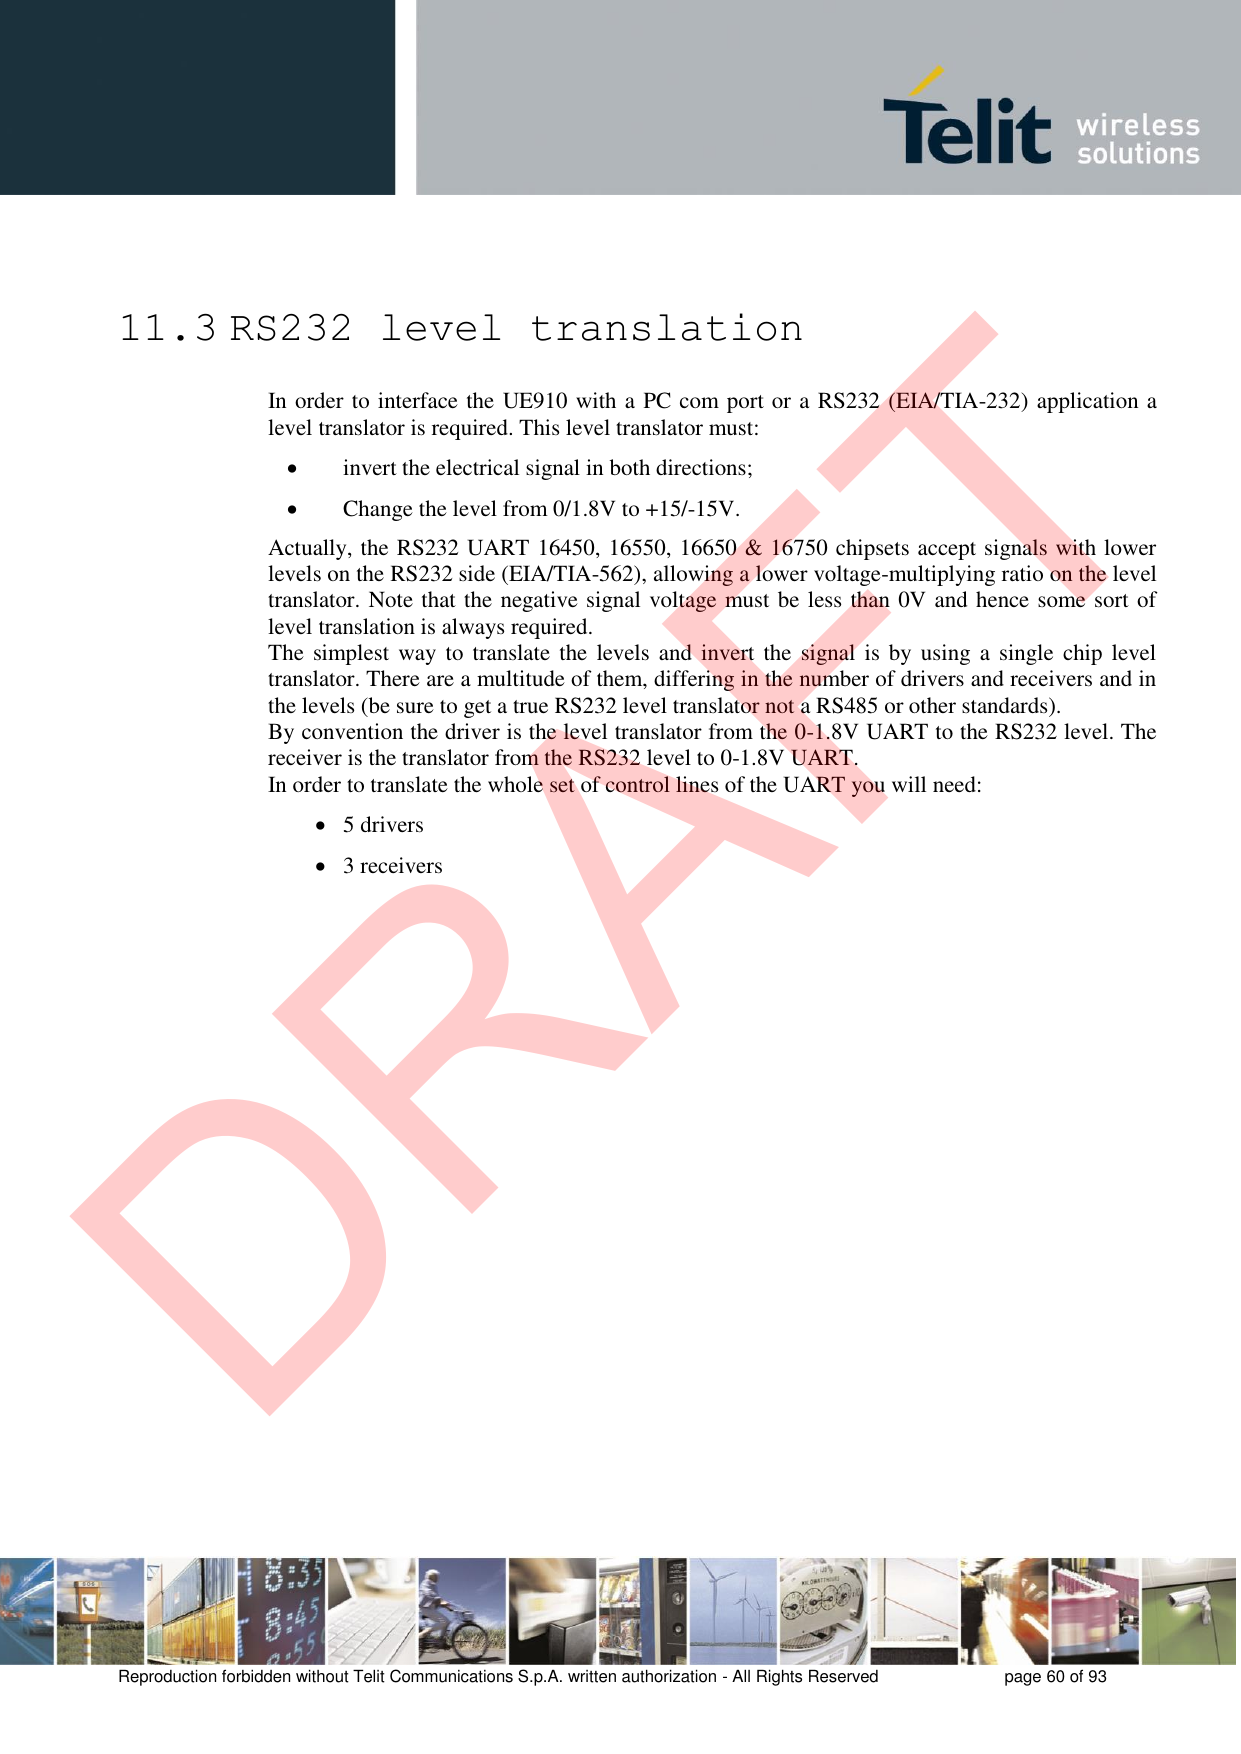 Reproduction forbidden without Telit Communications S.p.A. written authorization - All Rights Reserved  page 60 of 93 11.3 RS232 level translation In order to interface the UE910 with a PC com port or a RS232 (EIA/TIA-232) application a level translator is required. This level translator must: invert the electrical signal in both directions;Change the level from 0/1.8V to +15/-15V.Actually, the RS232 UART 16450, 16550, 16650 &amp; 16750 chipsets accept signals with lower levels on the RS232 side (EIA/TIA-562), allowing a lower voltage-multiplying ratio on the level translator. Note that the negative signal voltage must be less than 0V and hence some sort of level translation is always required.  The simplest way  to translate the  levels and invert the  signal is by  using a  single  chip level translator. There are a multitude of them, differing in the number of drivers and receivers and in the levels (be sure to get a true RS232 level translator not a RS485 or other standards). By convention the driver is the level translator from the 0-1.8V UART to the RS232 level. The receiver is the translator from the RS232 level to 0-1.8V UART. In order to translate the whole set of control lines of the UART you will need: 5 drivers3 receiversDRAFT